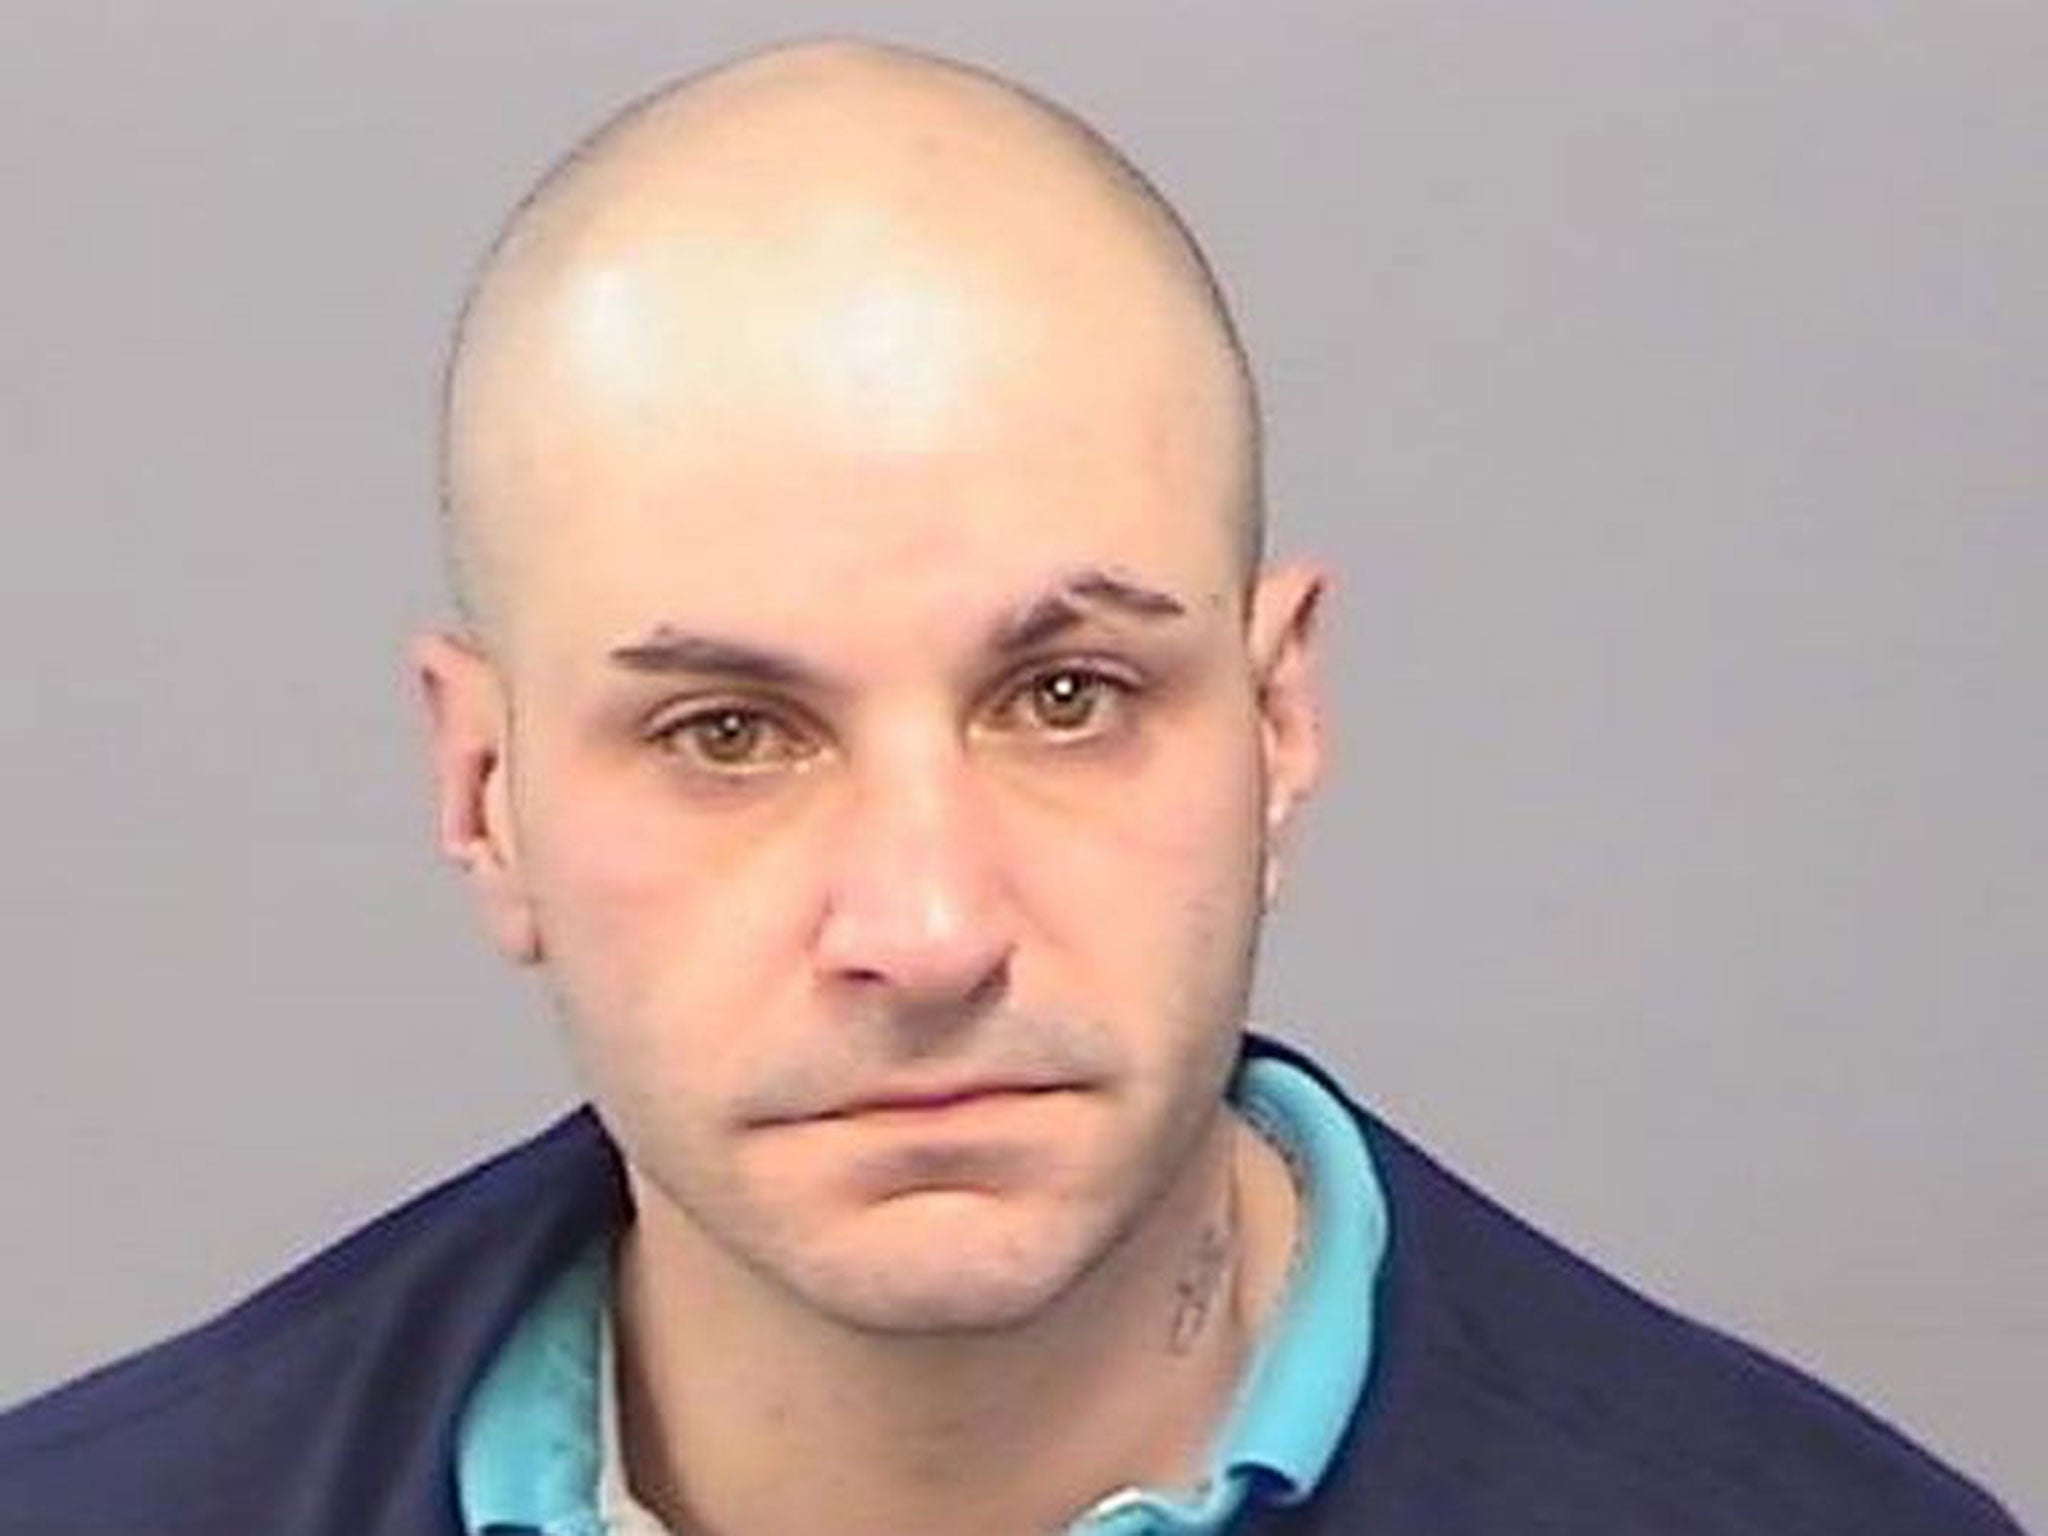 Robert Cerqua, 32, who has been given a life sentence at Winchester Crown Court for killing his twin brother Christopher